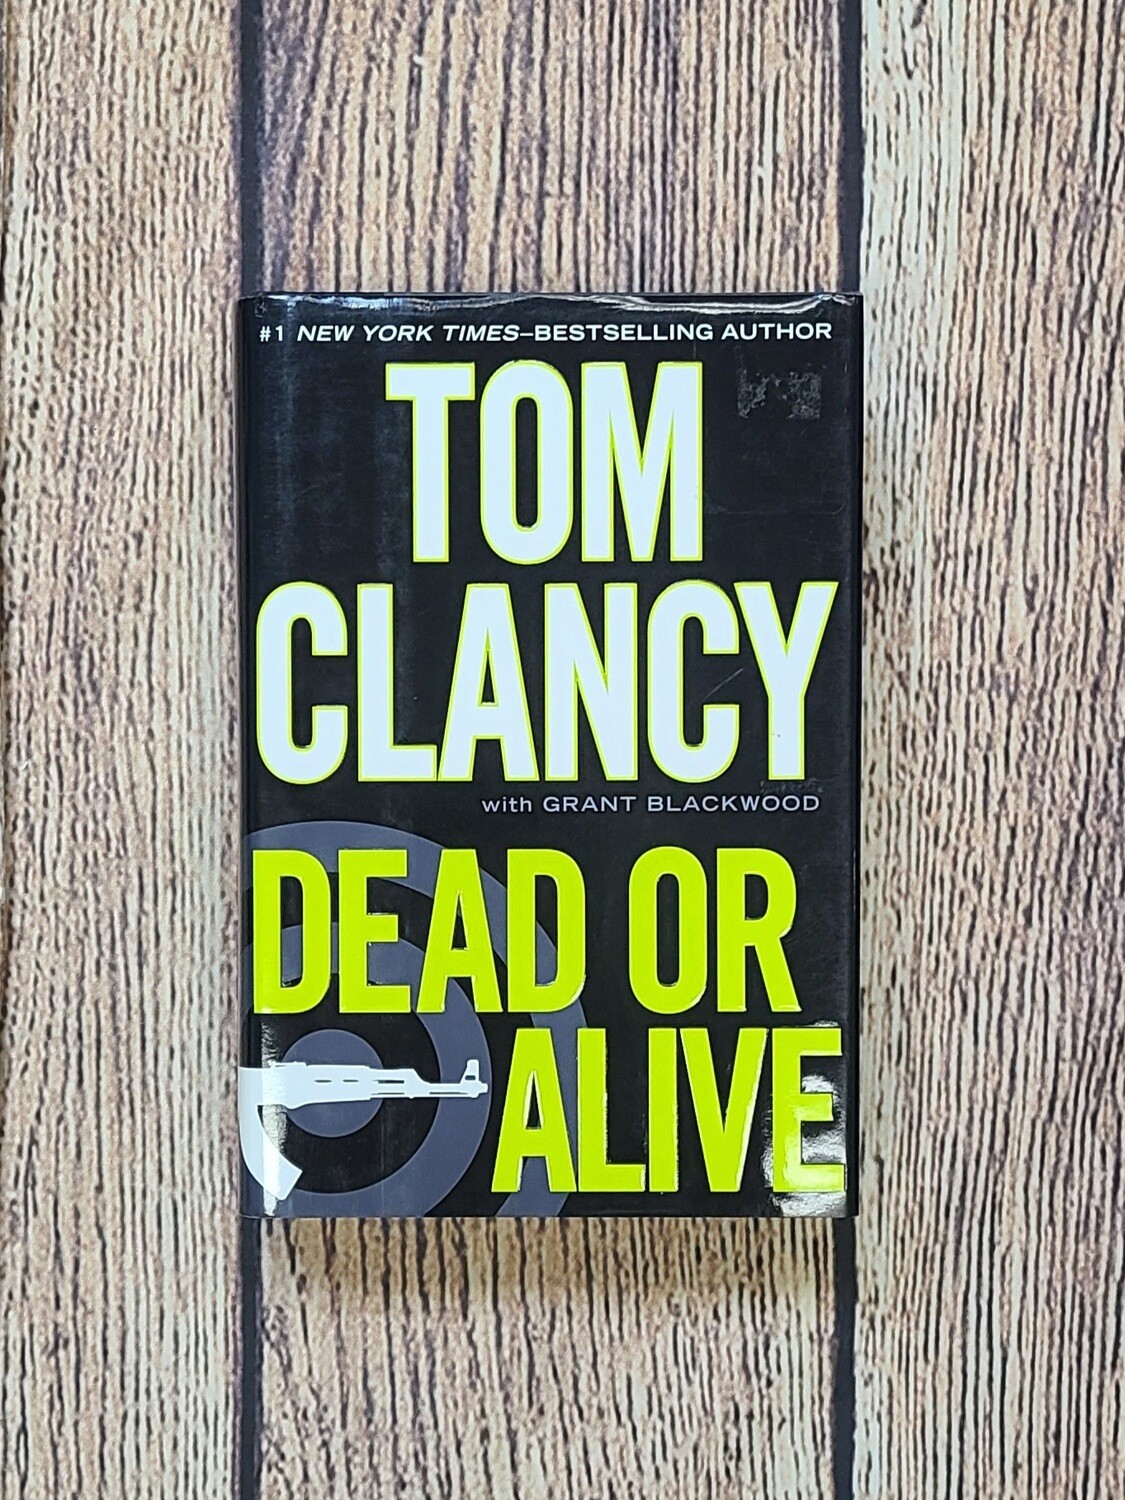 Dead or Alive by Tom Clancy with Grant Blackwood